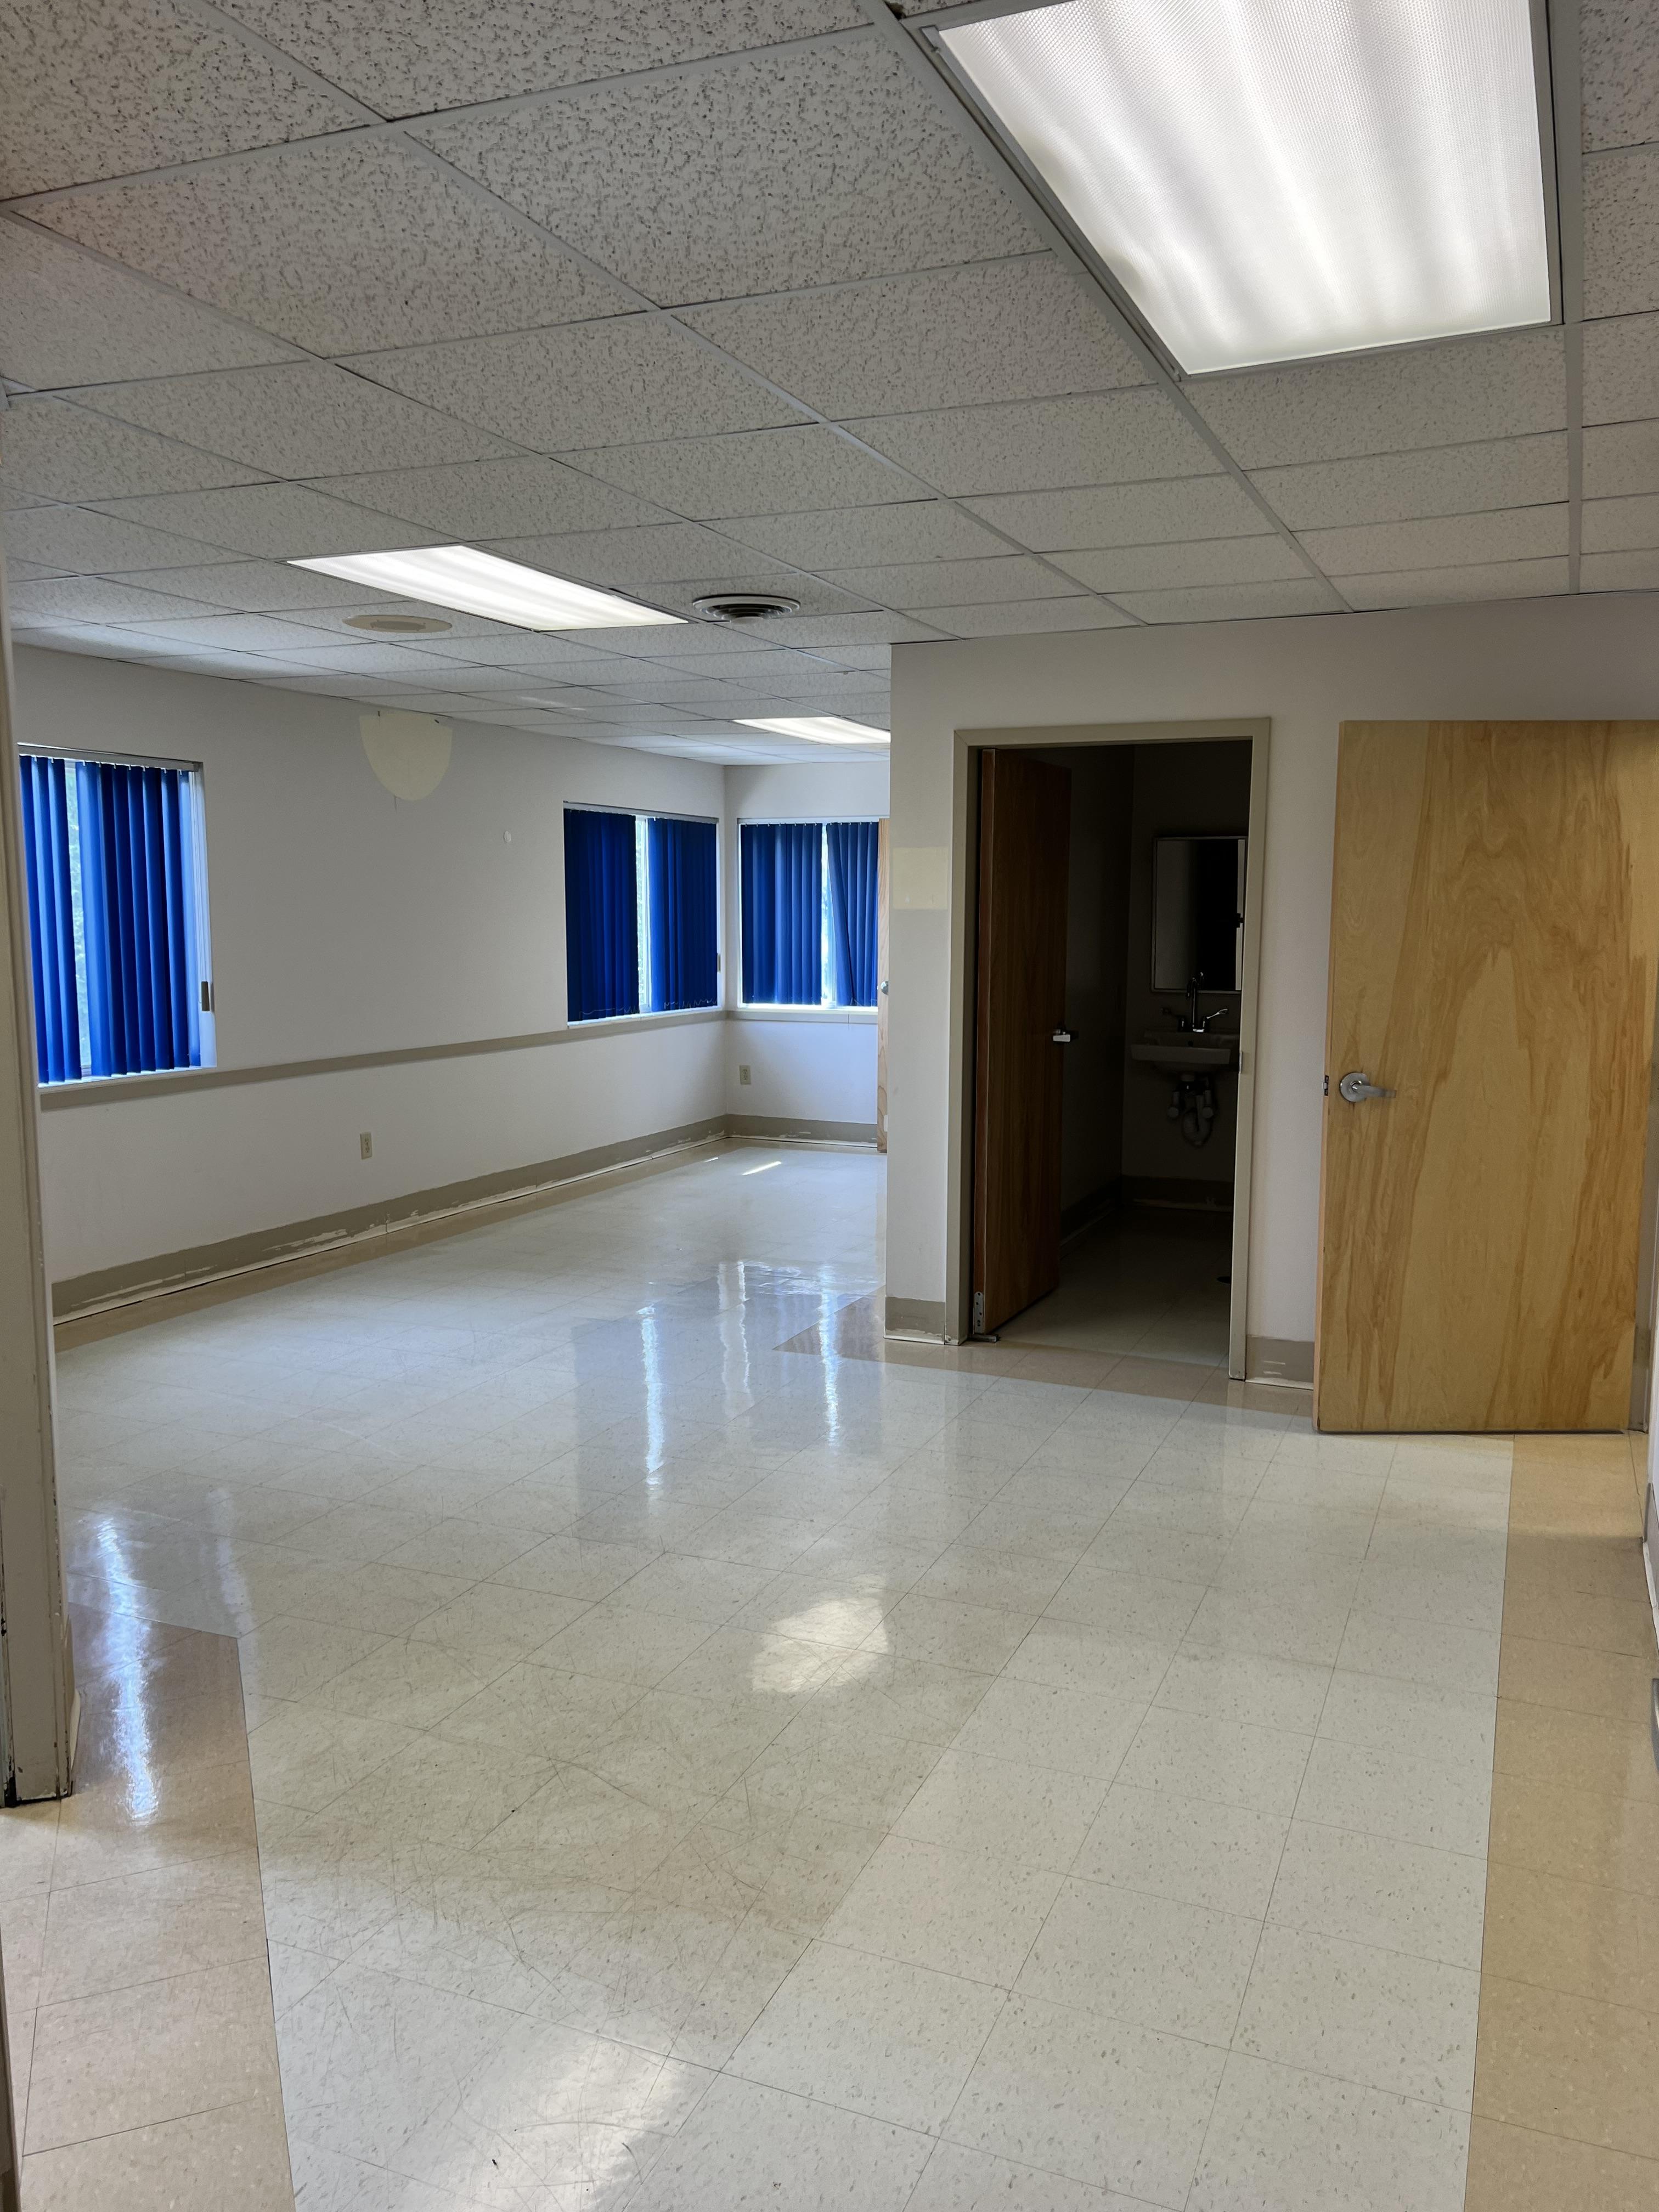 9 Law, 12051, ,3 BathroomsBathrooms,Commercial,For sale,Law,1526